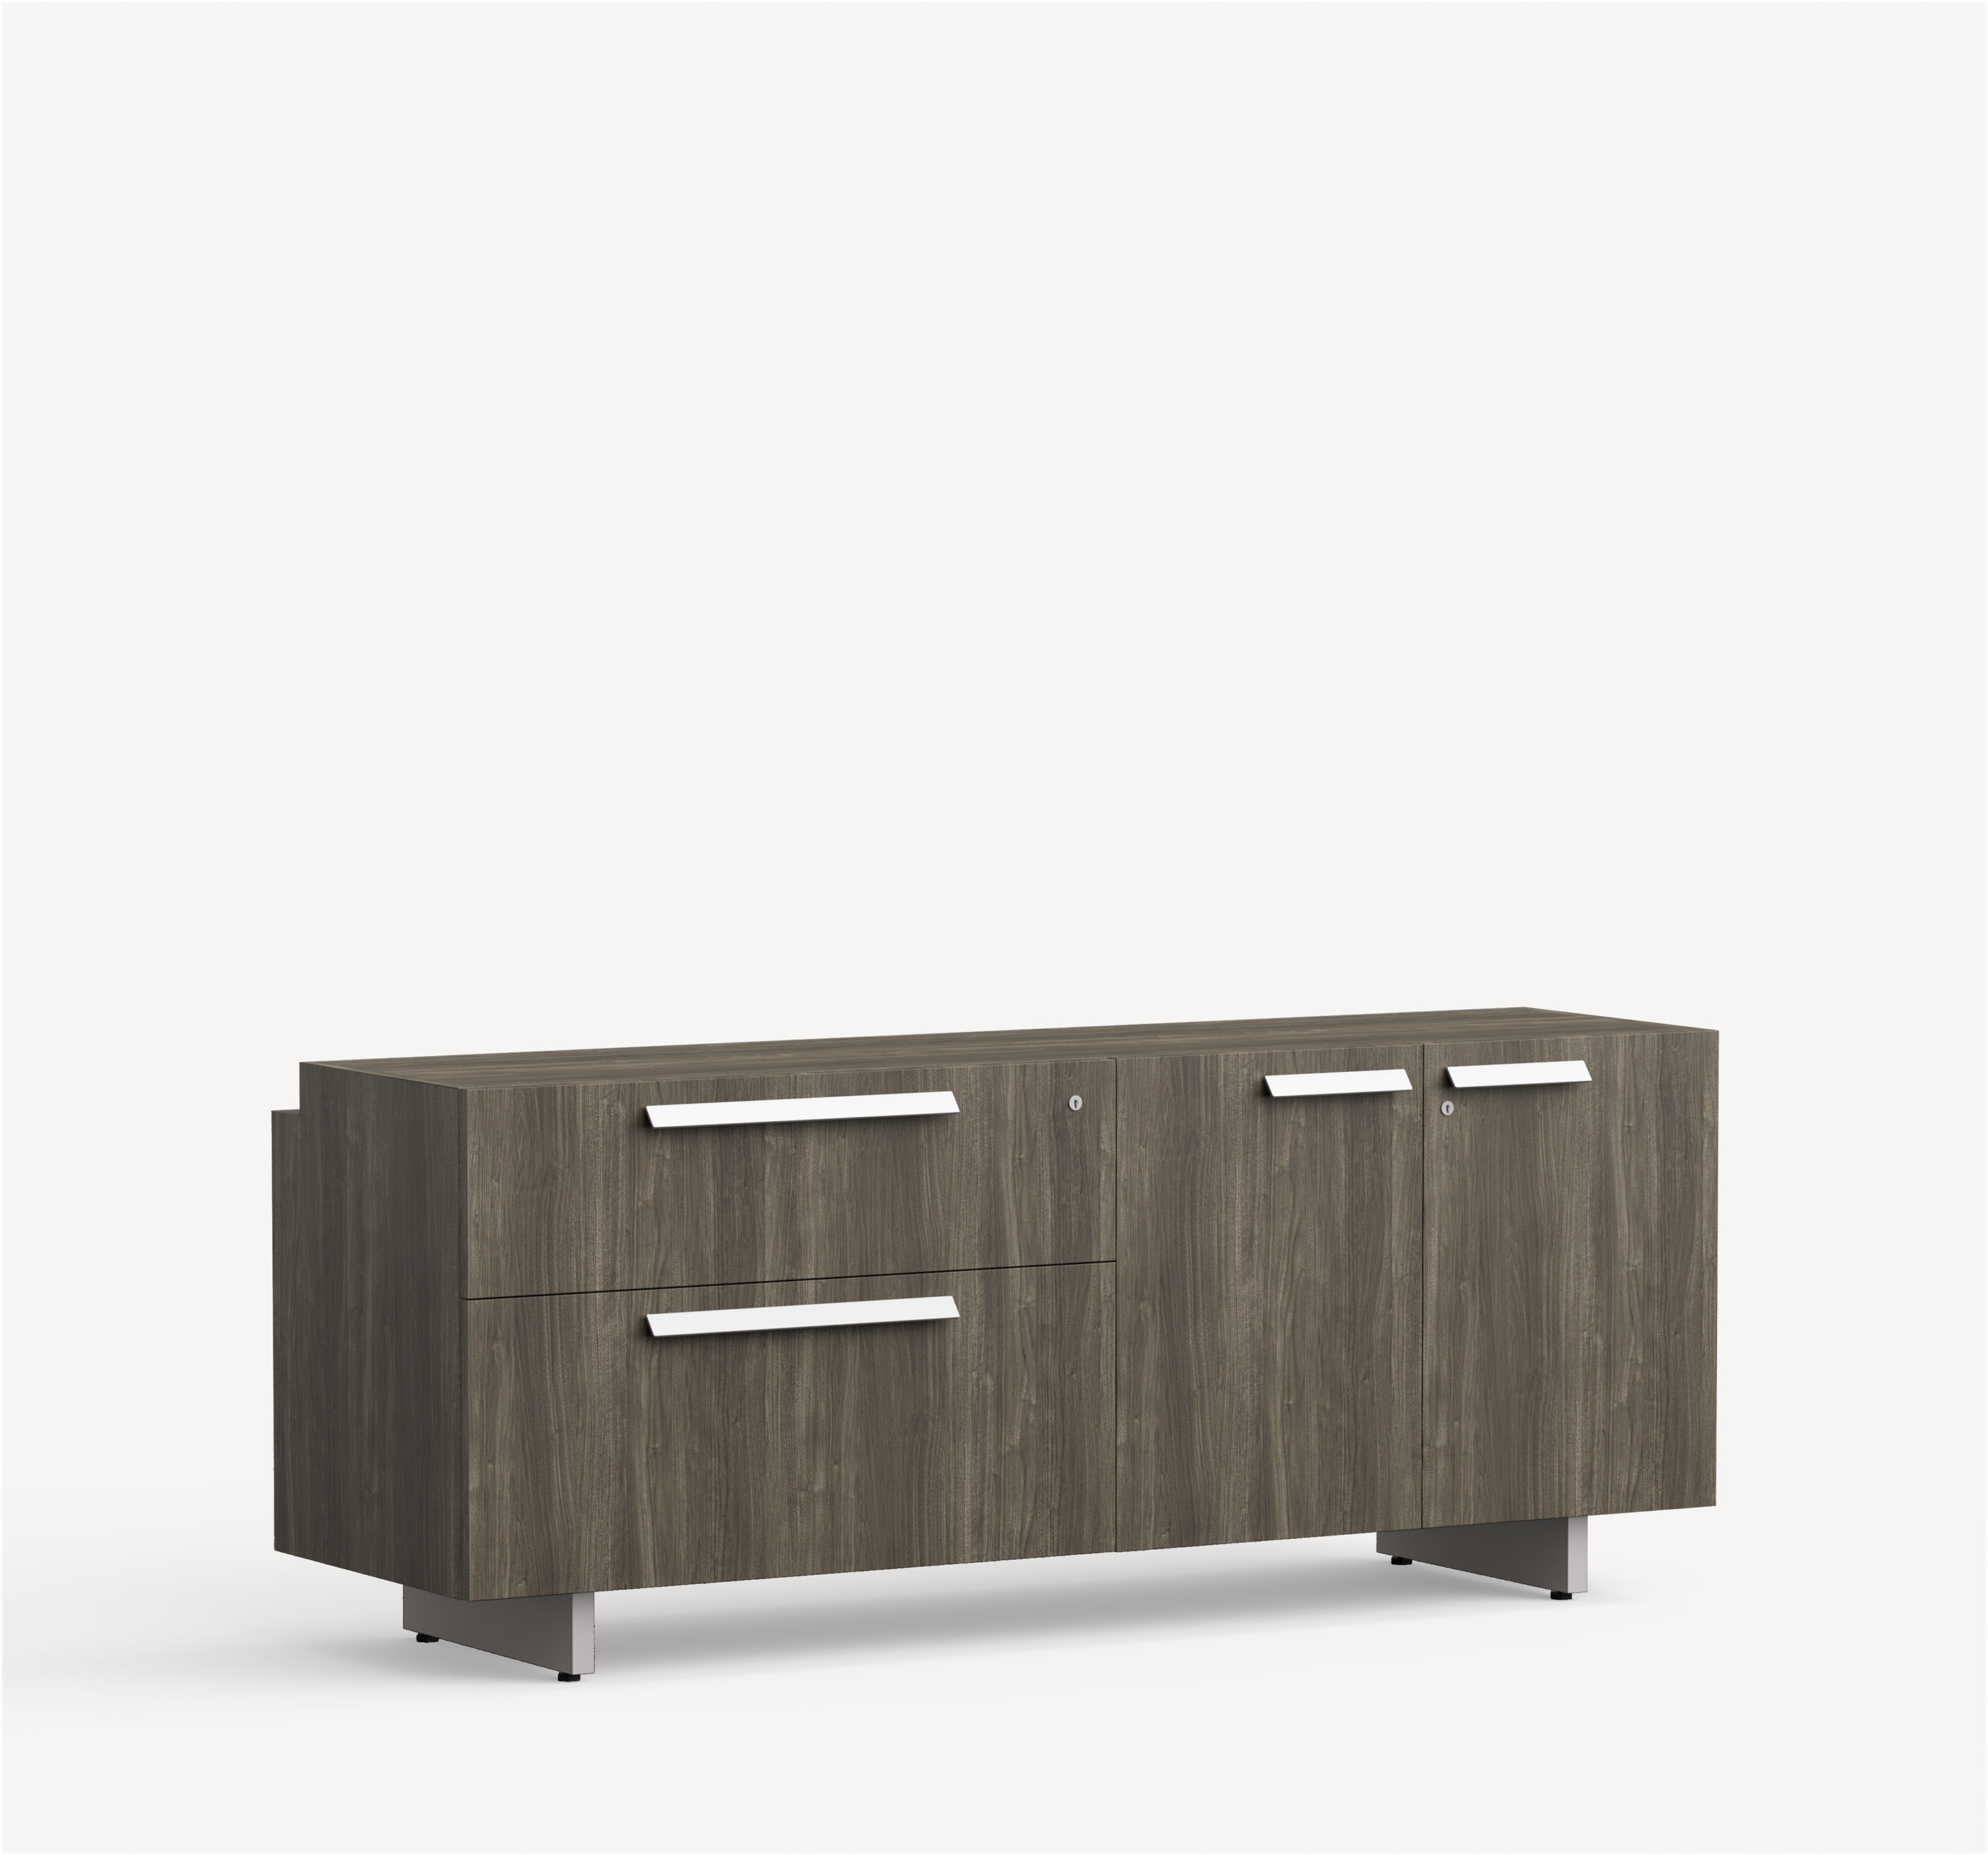 Approach Credenza in brownish grey wood with right-sided hinged doors, one box and one file drawer on the left and silver handles.